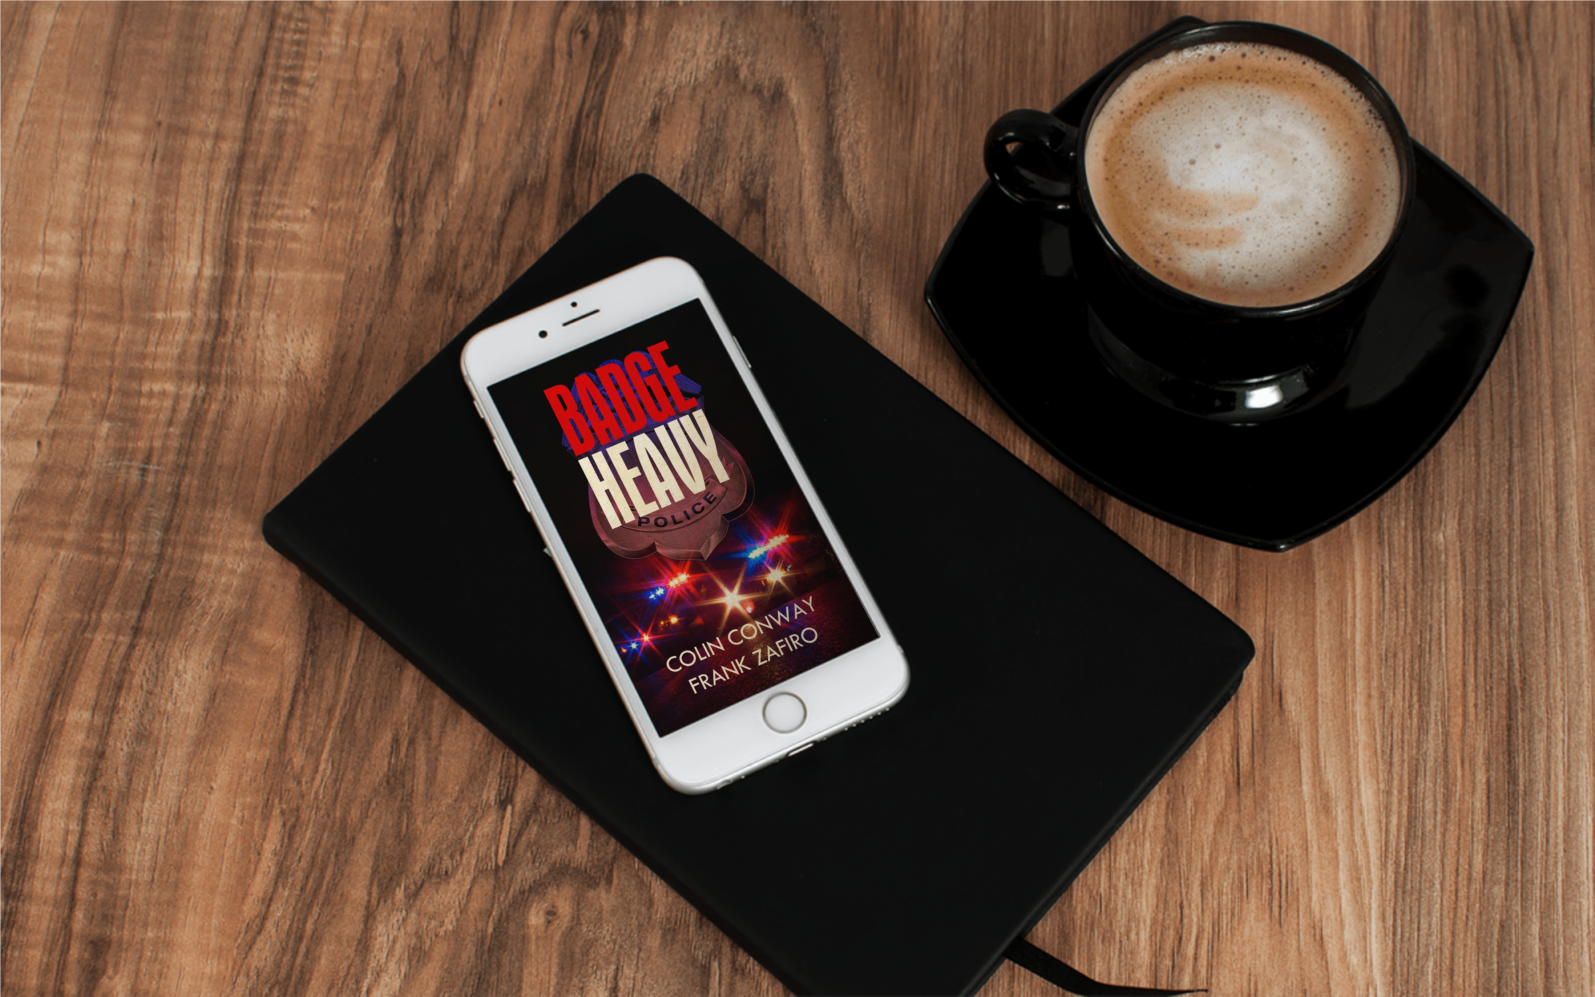 BADGE HEAVY is a political-criminal thriller from crime fiction authors Colin Conway and Frank Zafiro. It’s the ultimate ride along and makes you feel as if you’ve almost joined the police department.